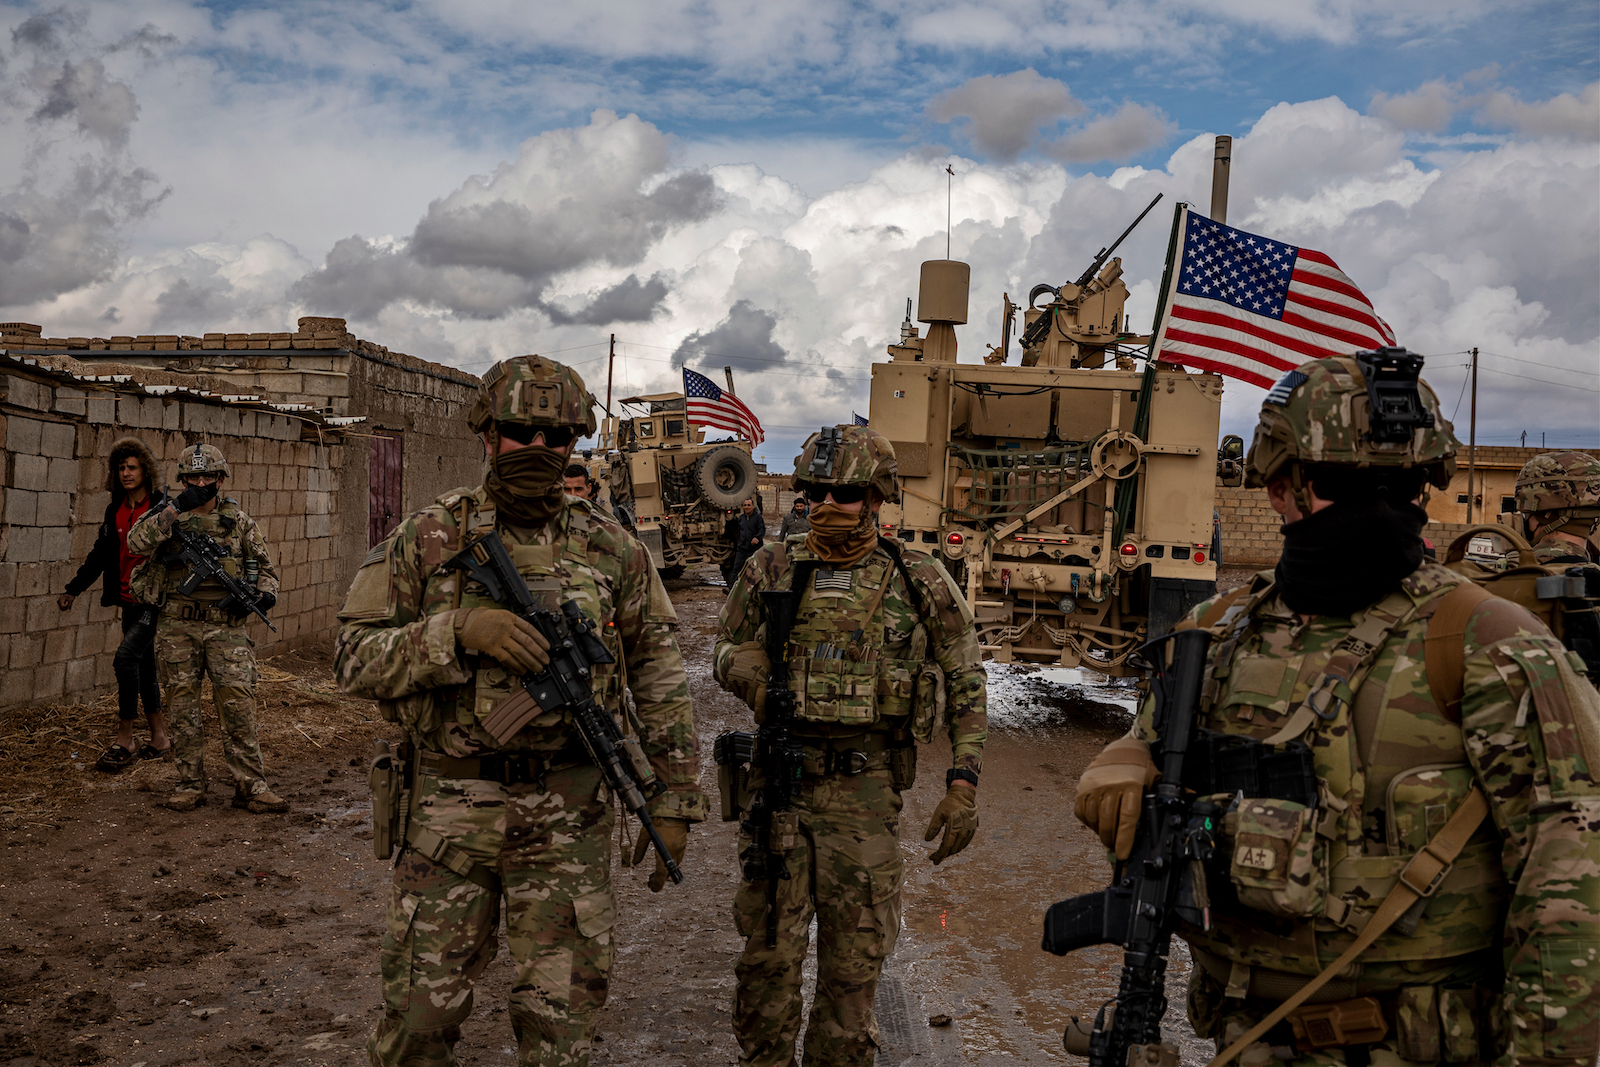 U.S. troops stationed in Syria